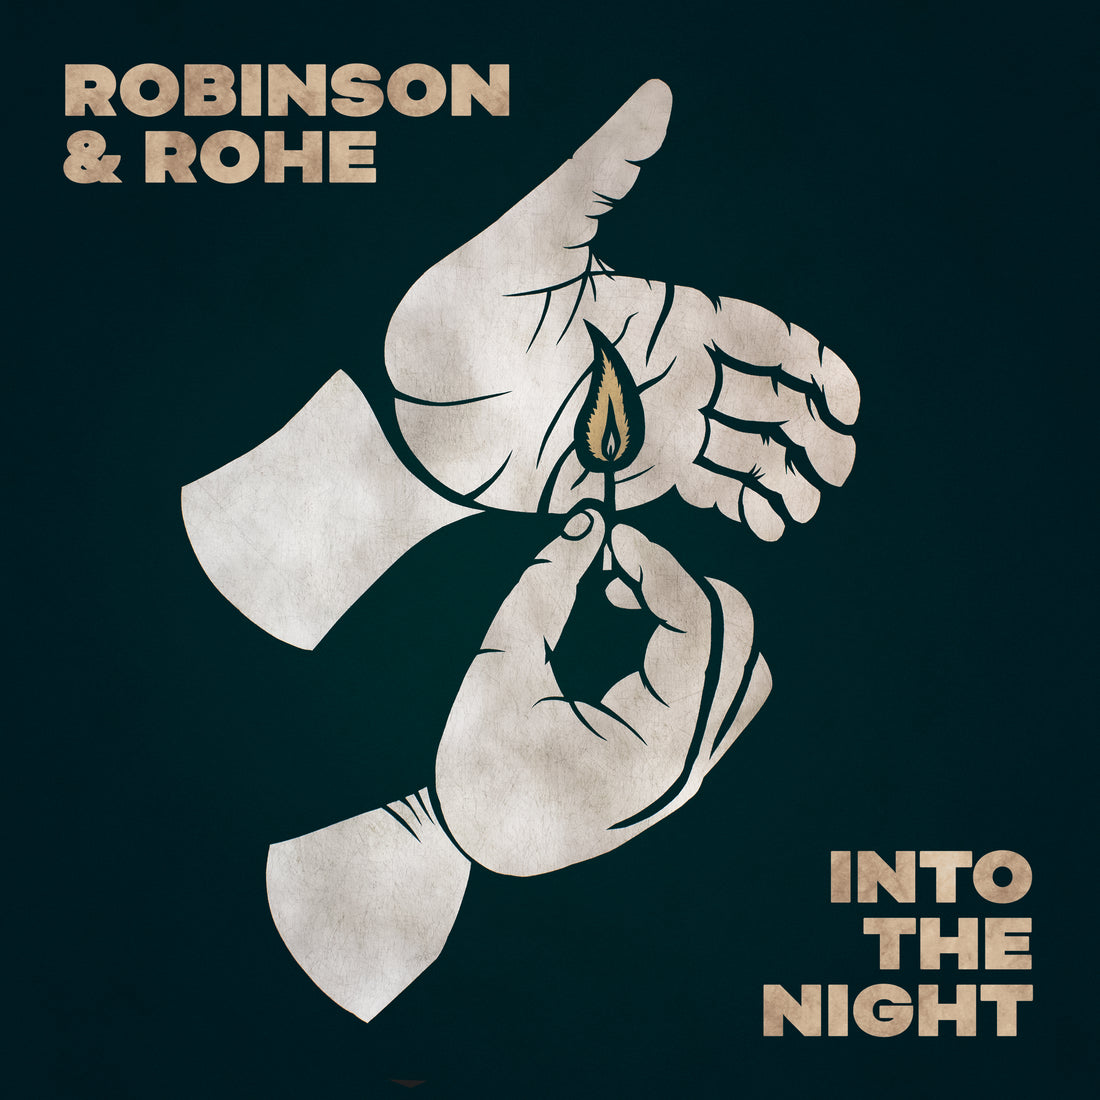 New Single from Robinson & Rohe "Off Track" Out Now!